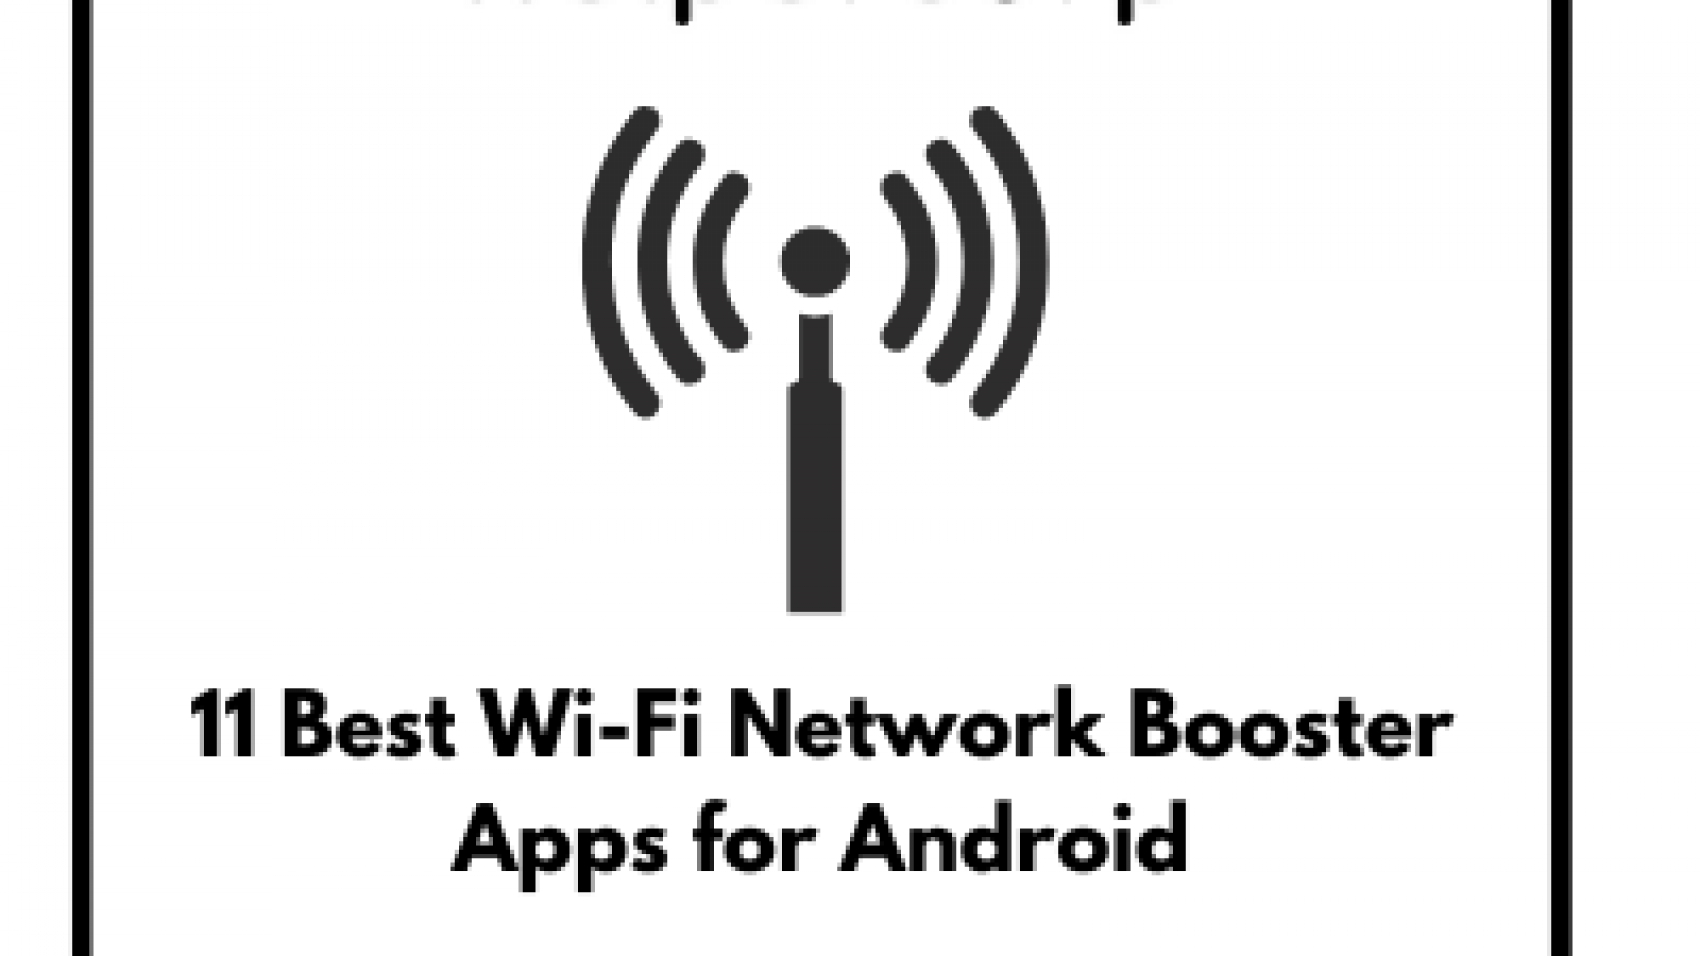 11 Best Wi-Fi Network Booster Apps for Android